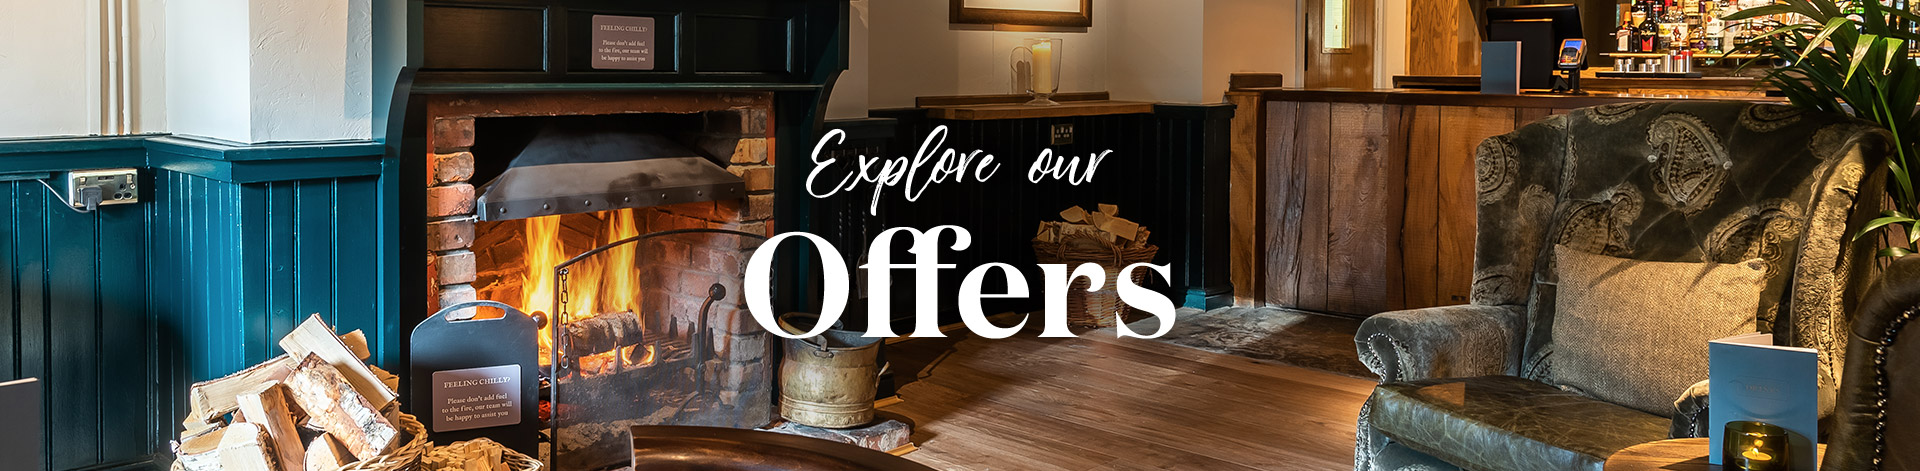 Our latest offers at The Calverley Arms